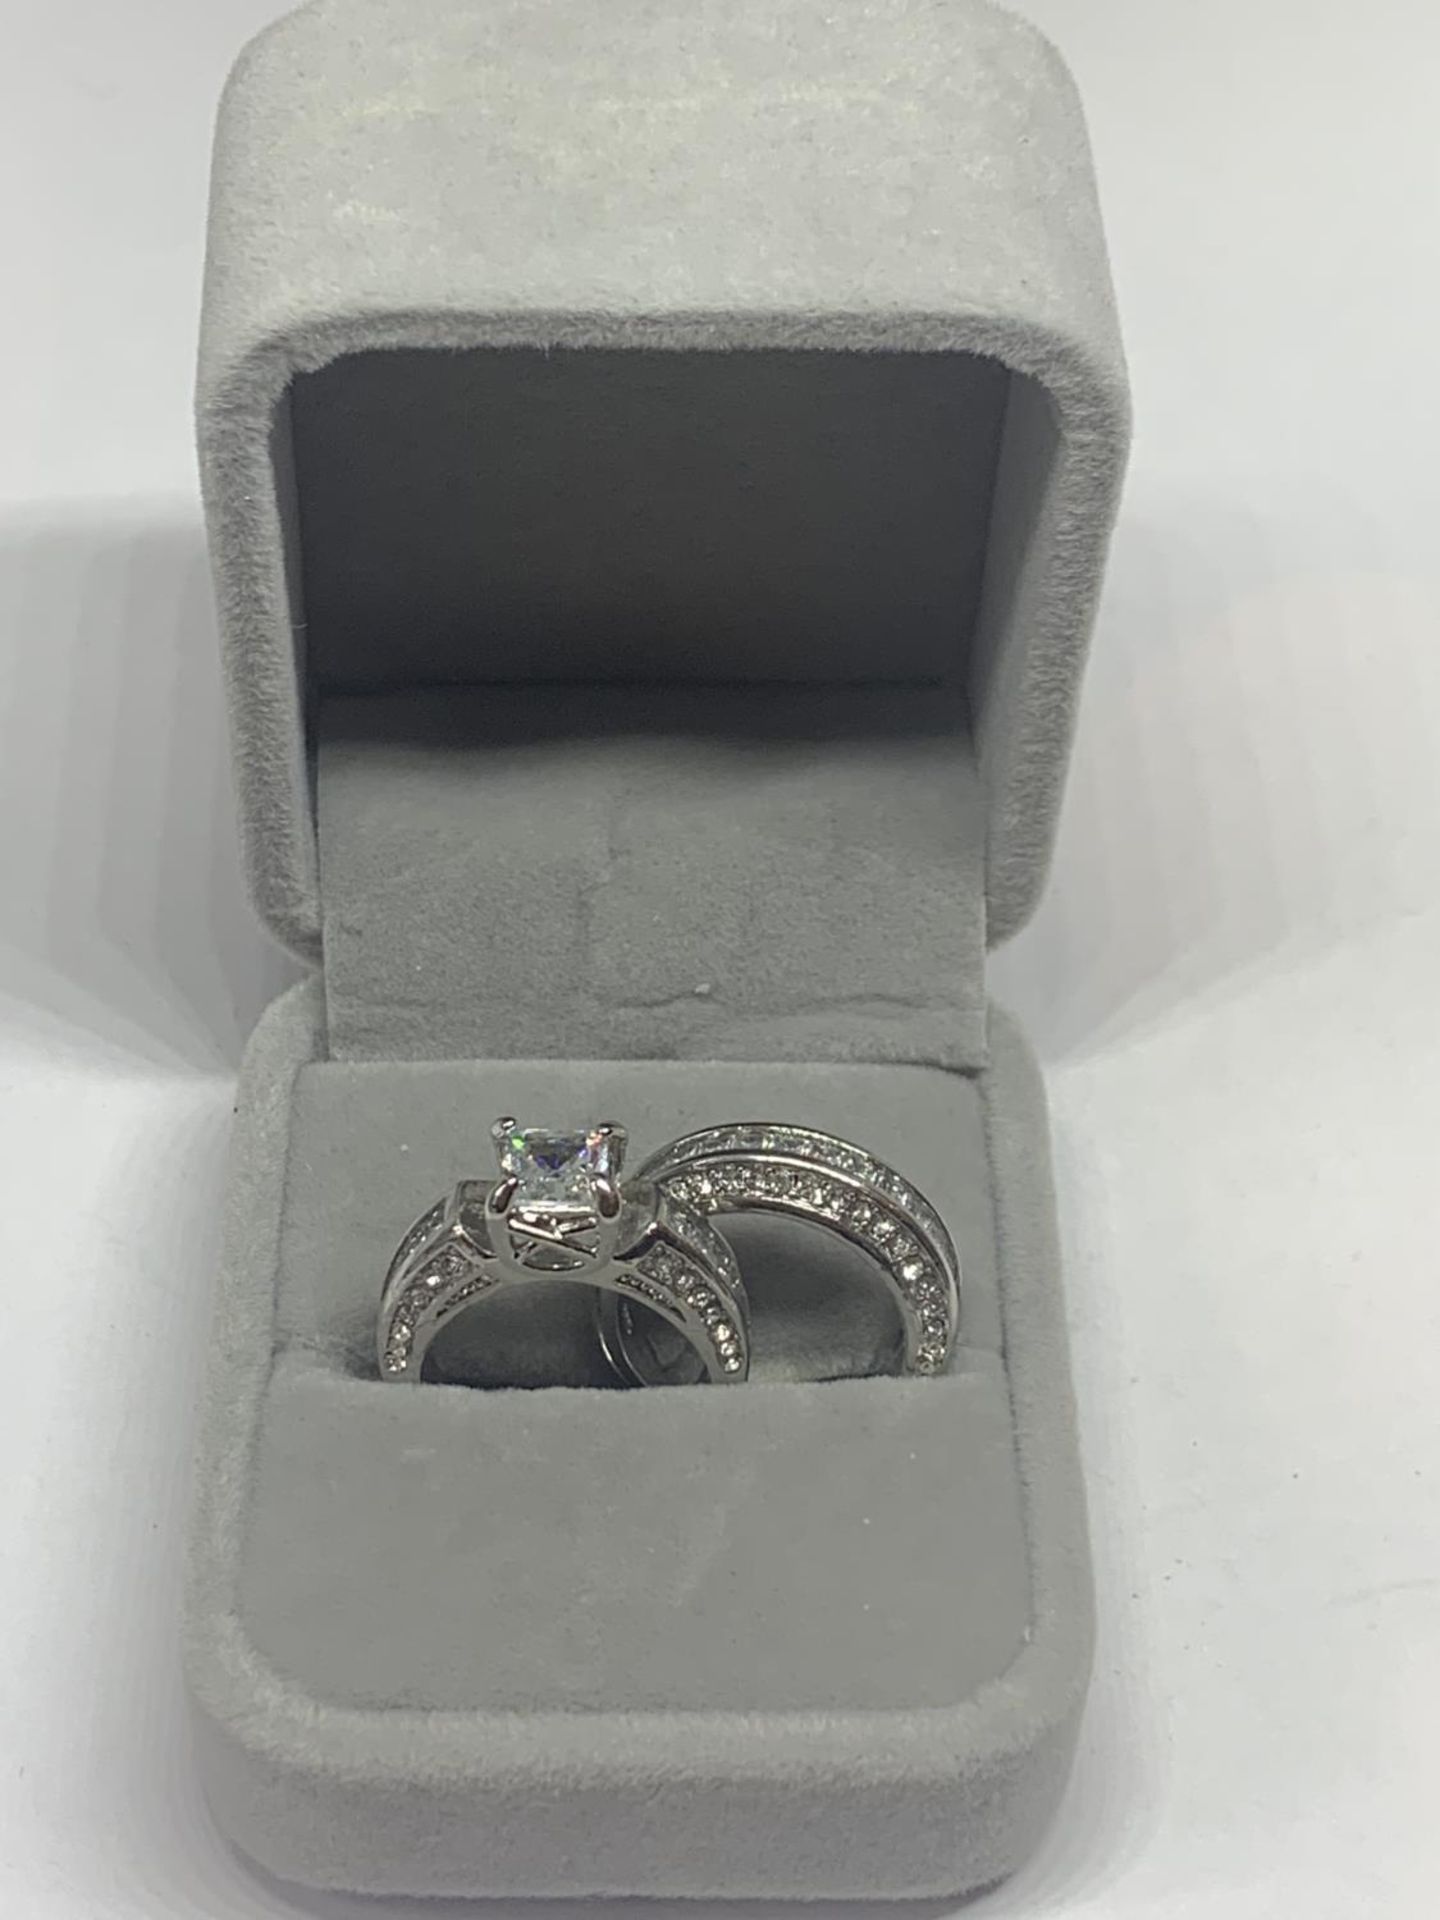 TWO MARKED 925 SILVER RINGS WITH CLEAR STONES ONE WITH A SOLITAIRE SIZE N IN A PRESENTATION BOX